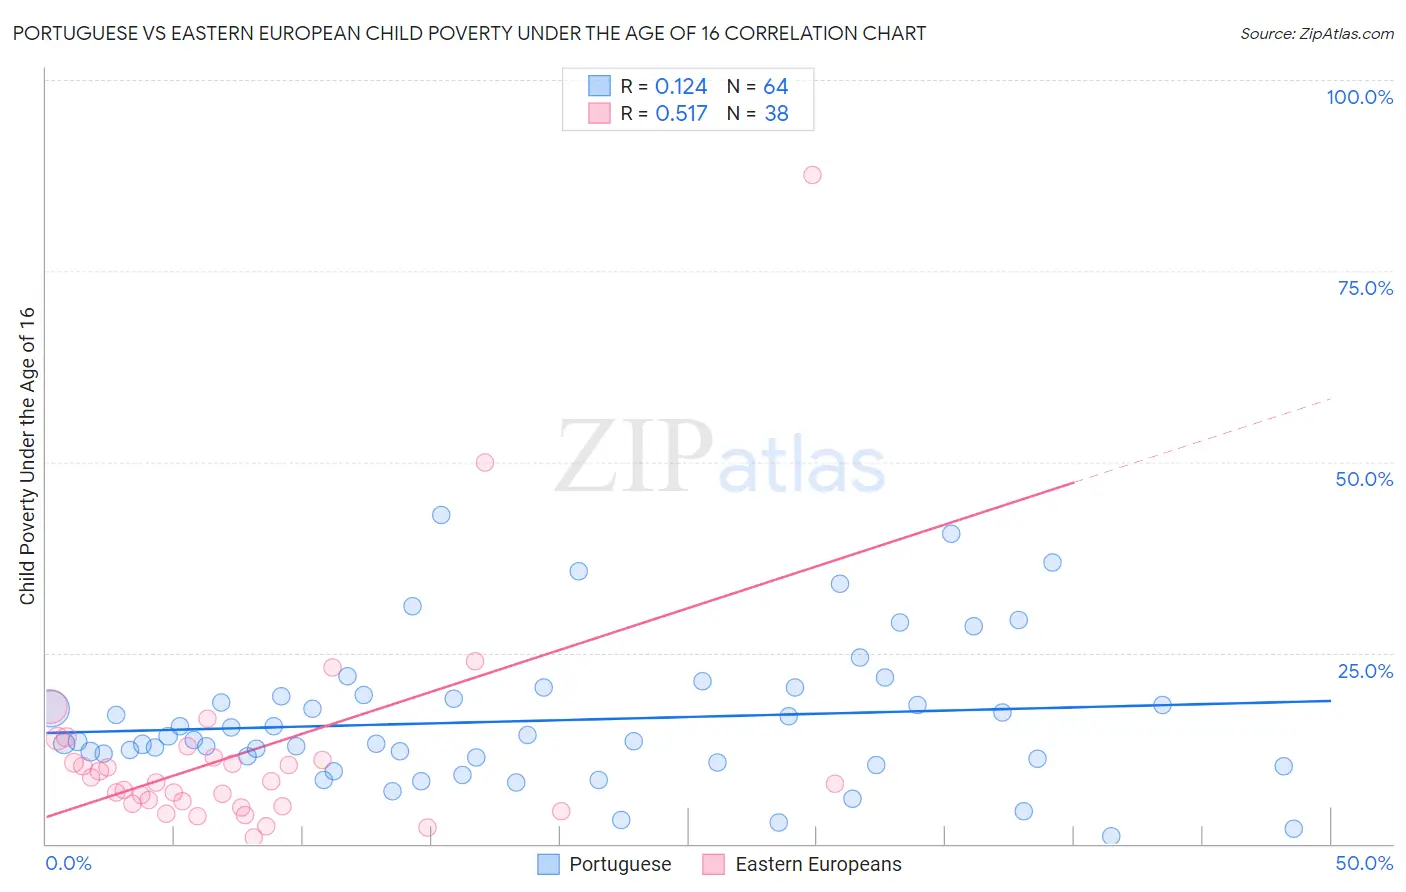 Portuguese vs Eastern European Child Poverty Under the Age of 16